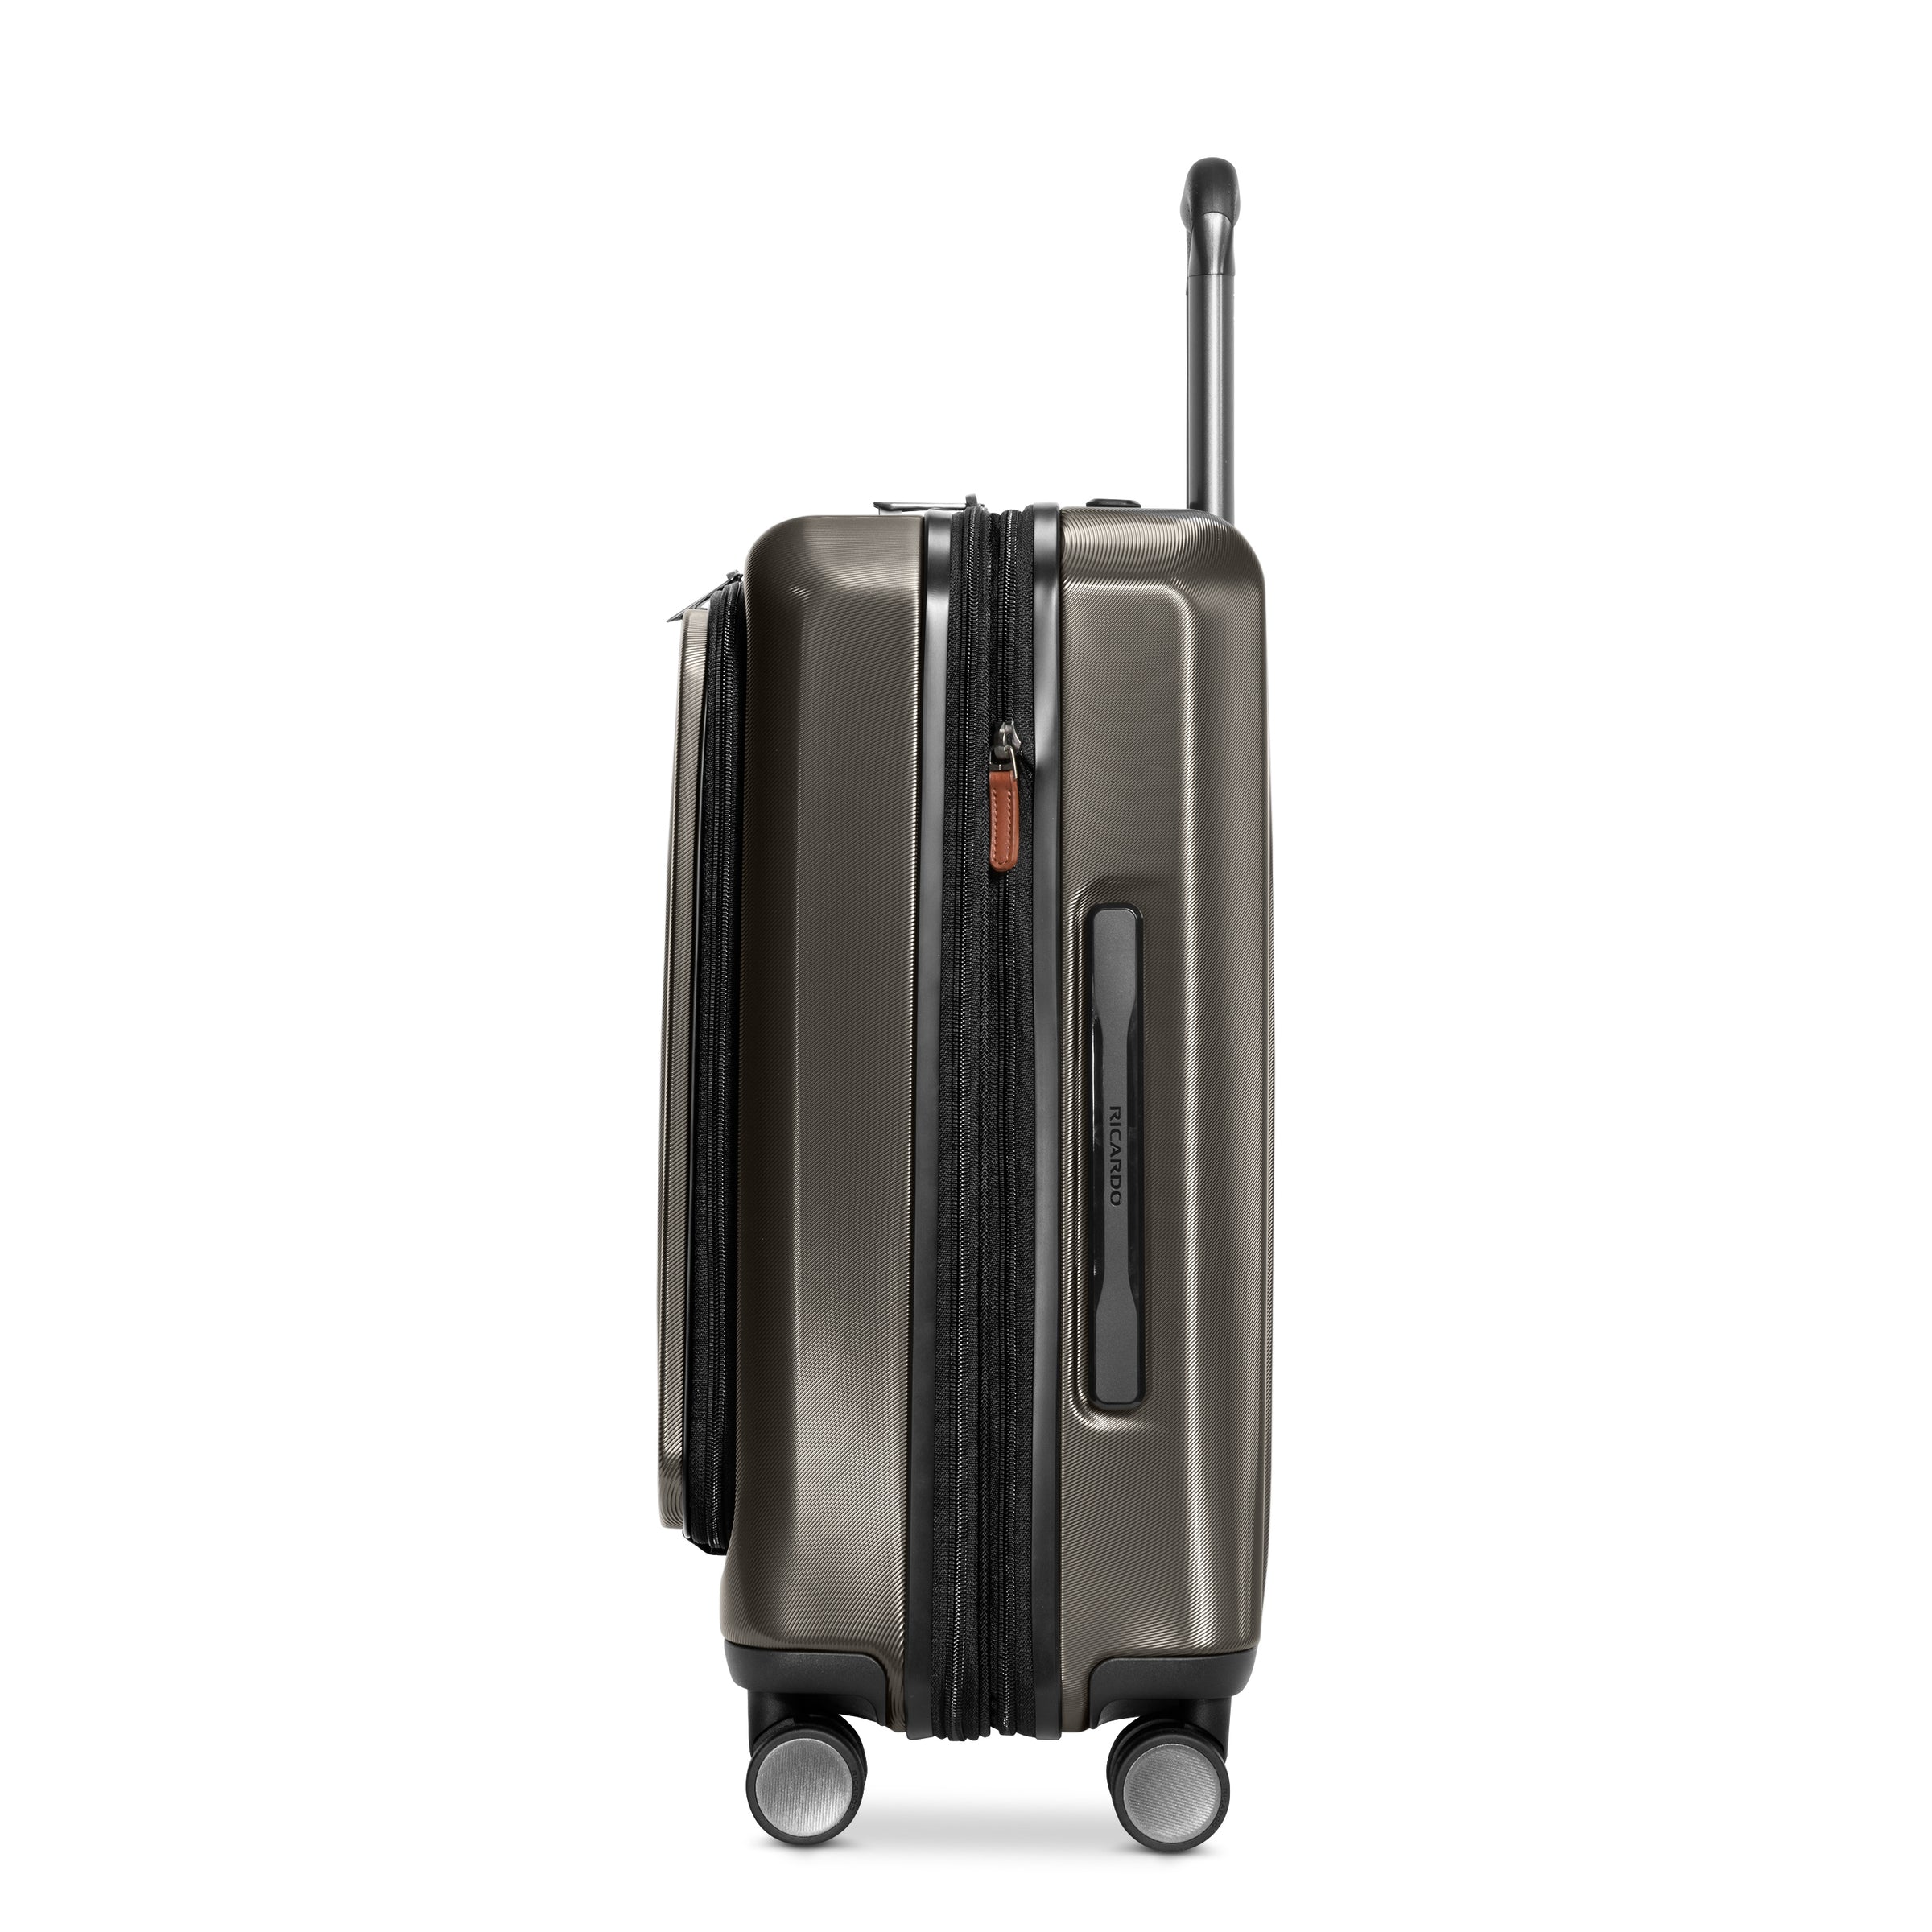 Montecito 2.0 Fast Access™ Front-Opening Hardside Carry-On Expandable Spinner